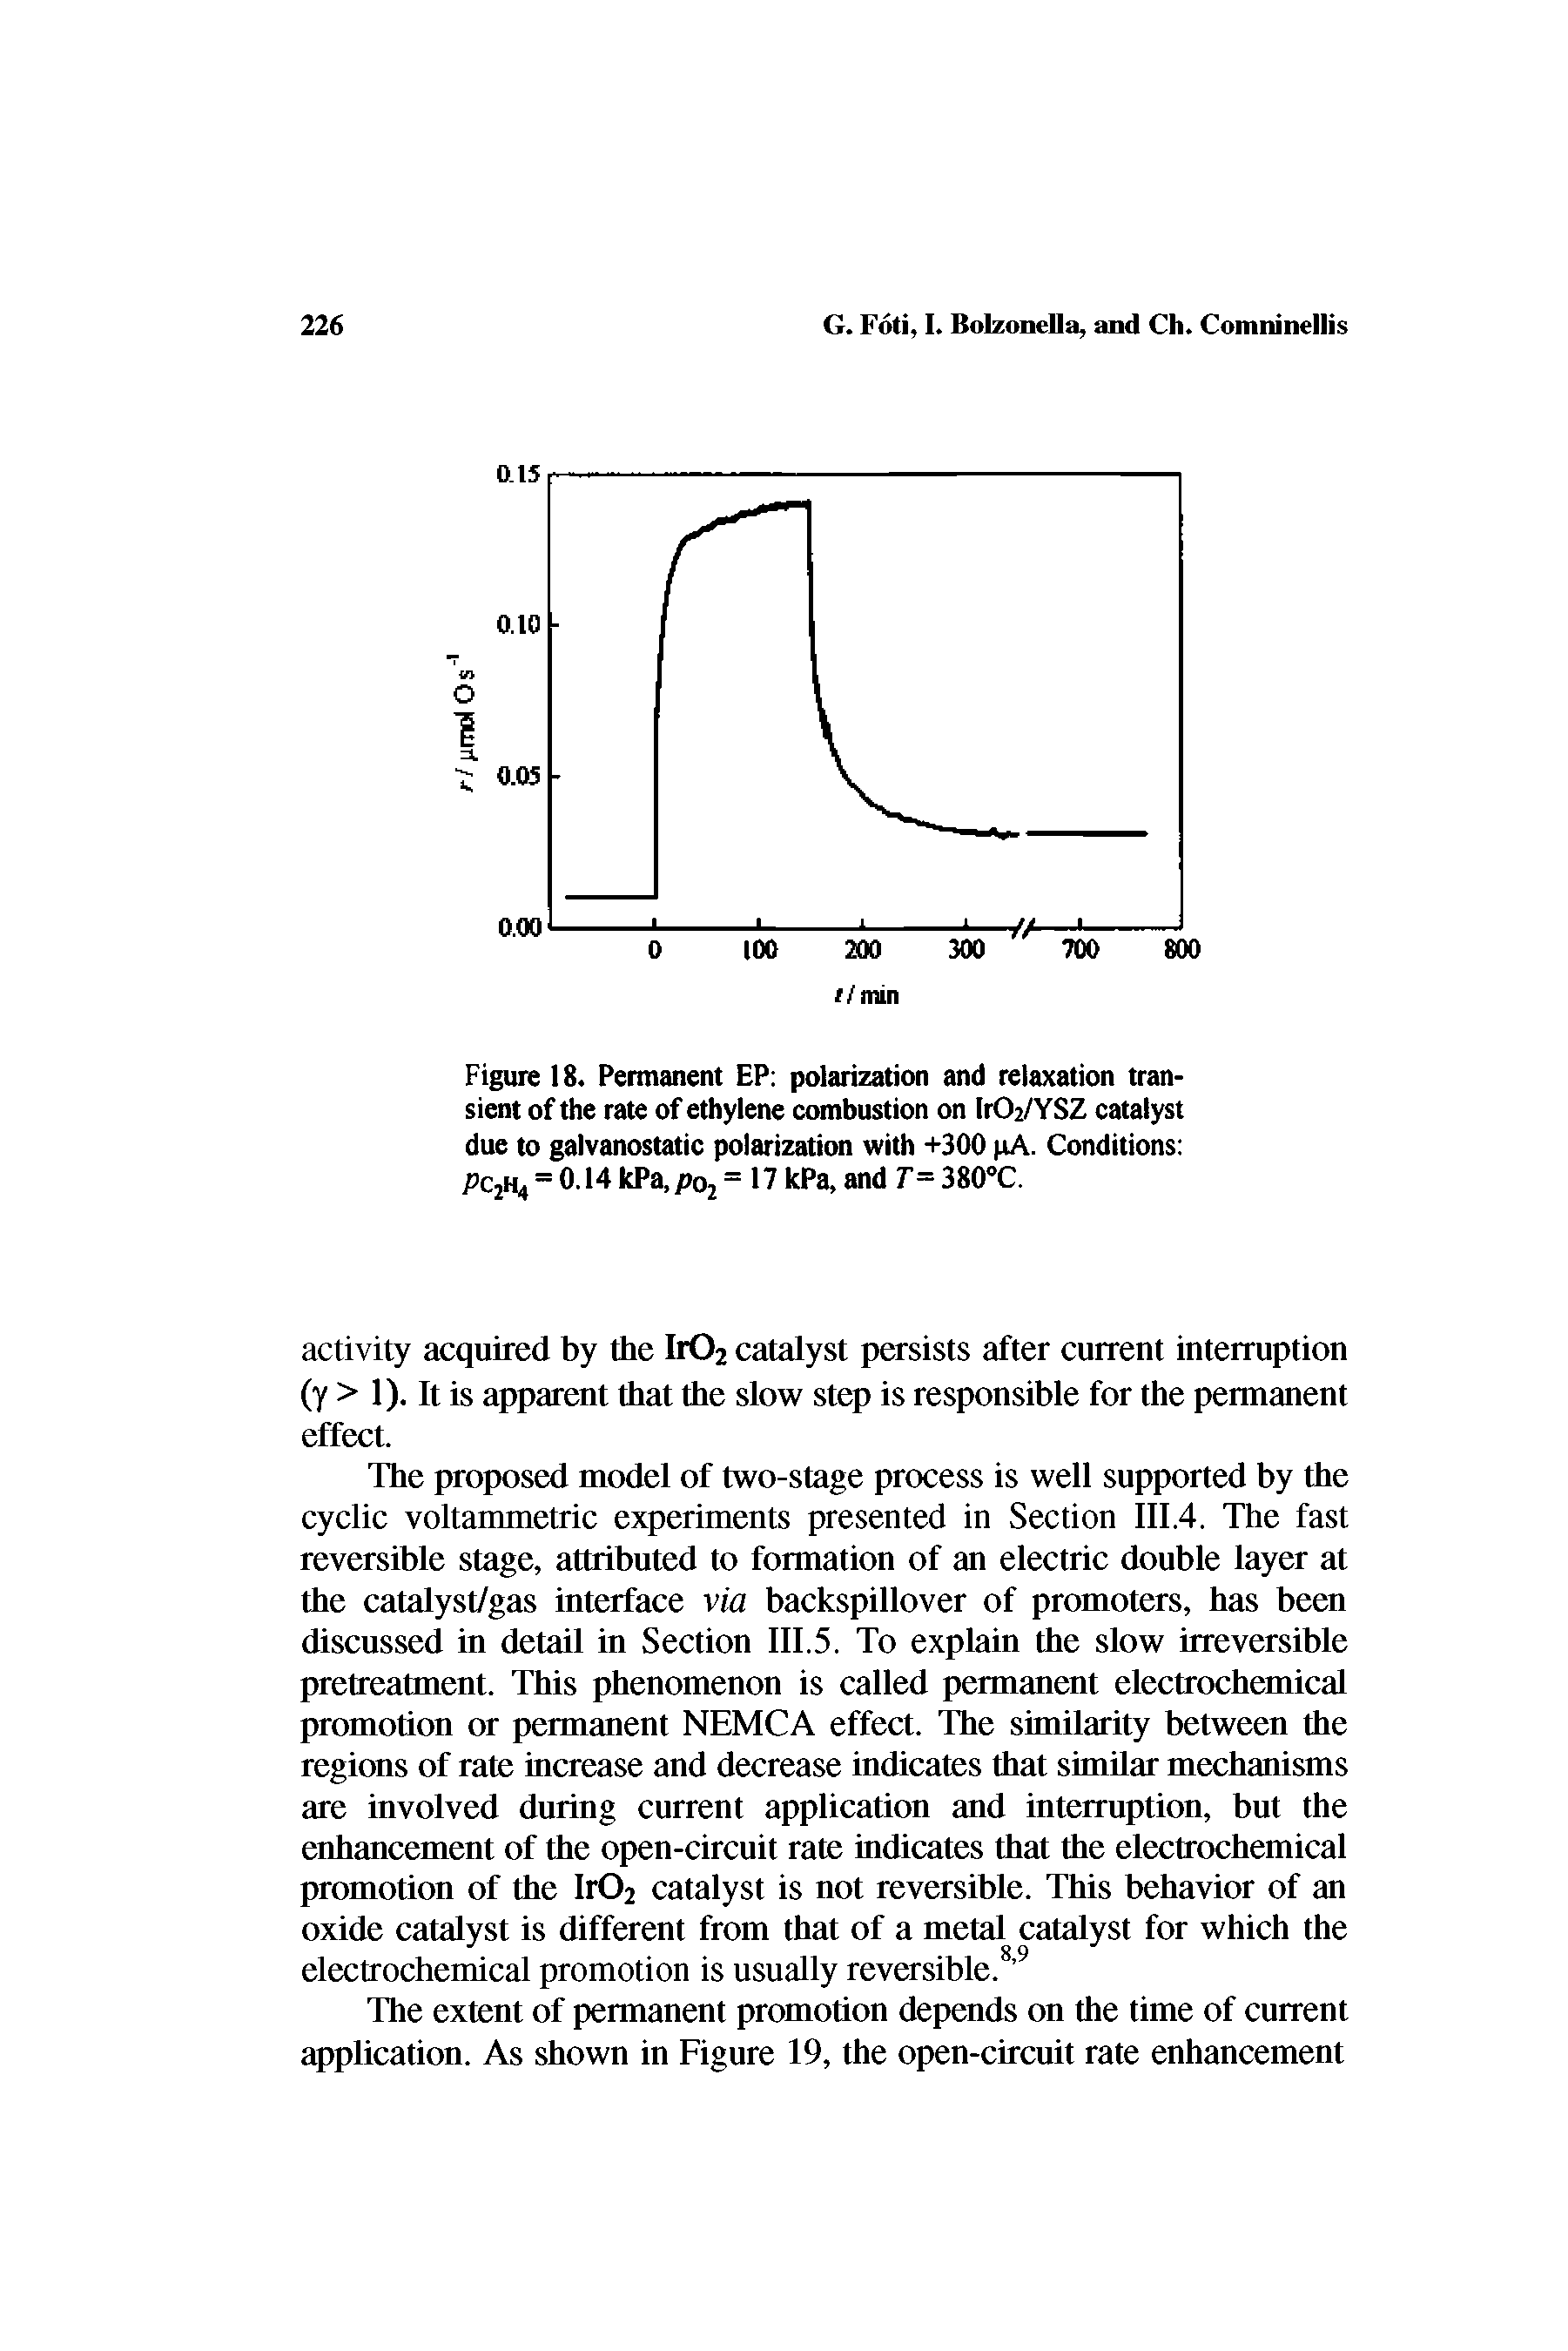 Figure 18. Permanent EP polarization and relaxation transient of the rate of ethylene combustion on lr02/YSZ catalyst due to galvanostatic polarization with +300 pA. Conditions PC2H4 = 0.14kPa,po2= 17kPa,and r=380°C.